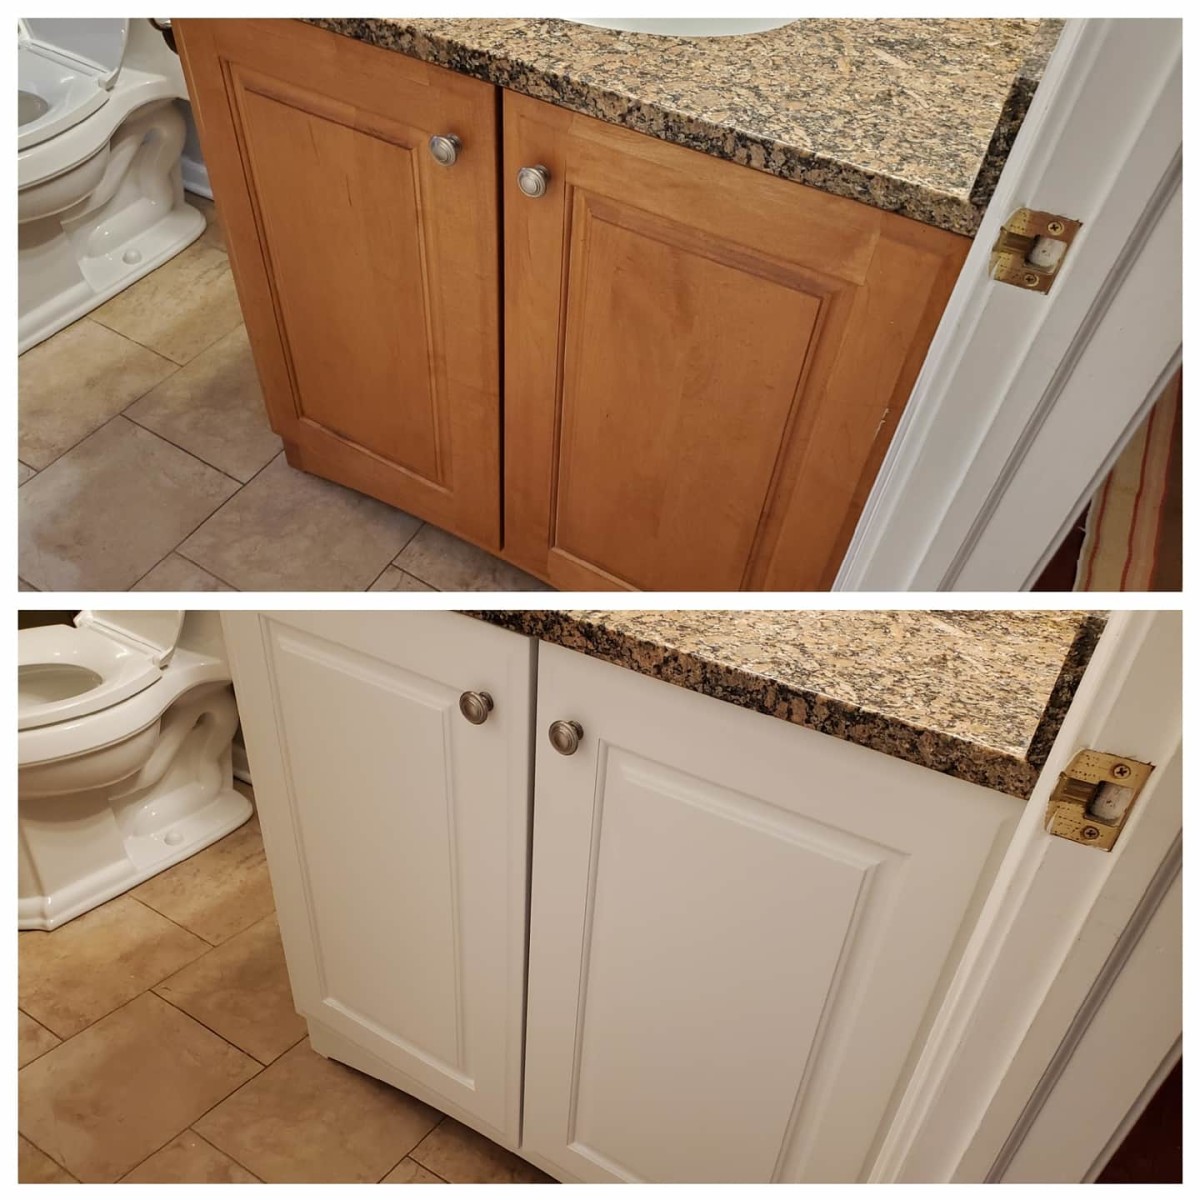 Here are before and after photos of a maple bathroom vanity I spray painted white.